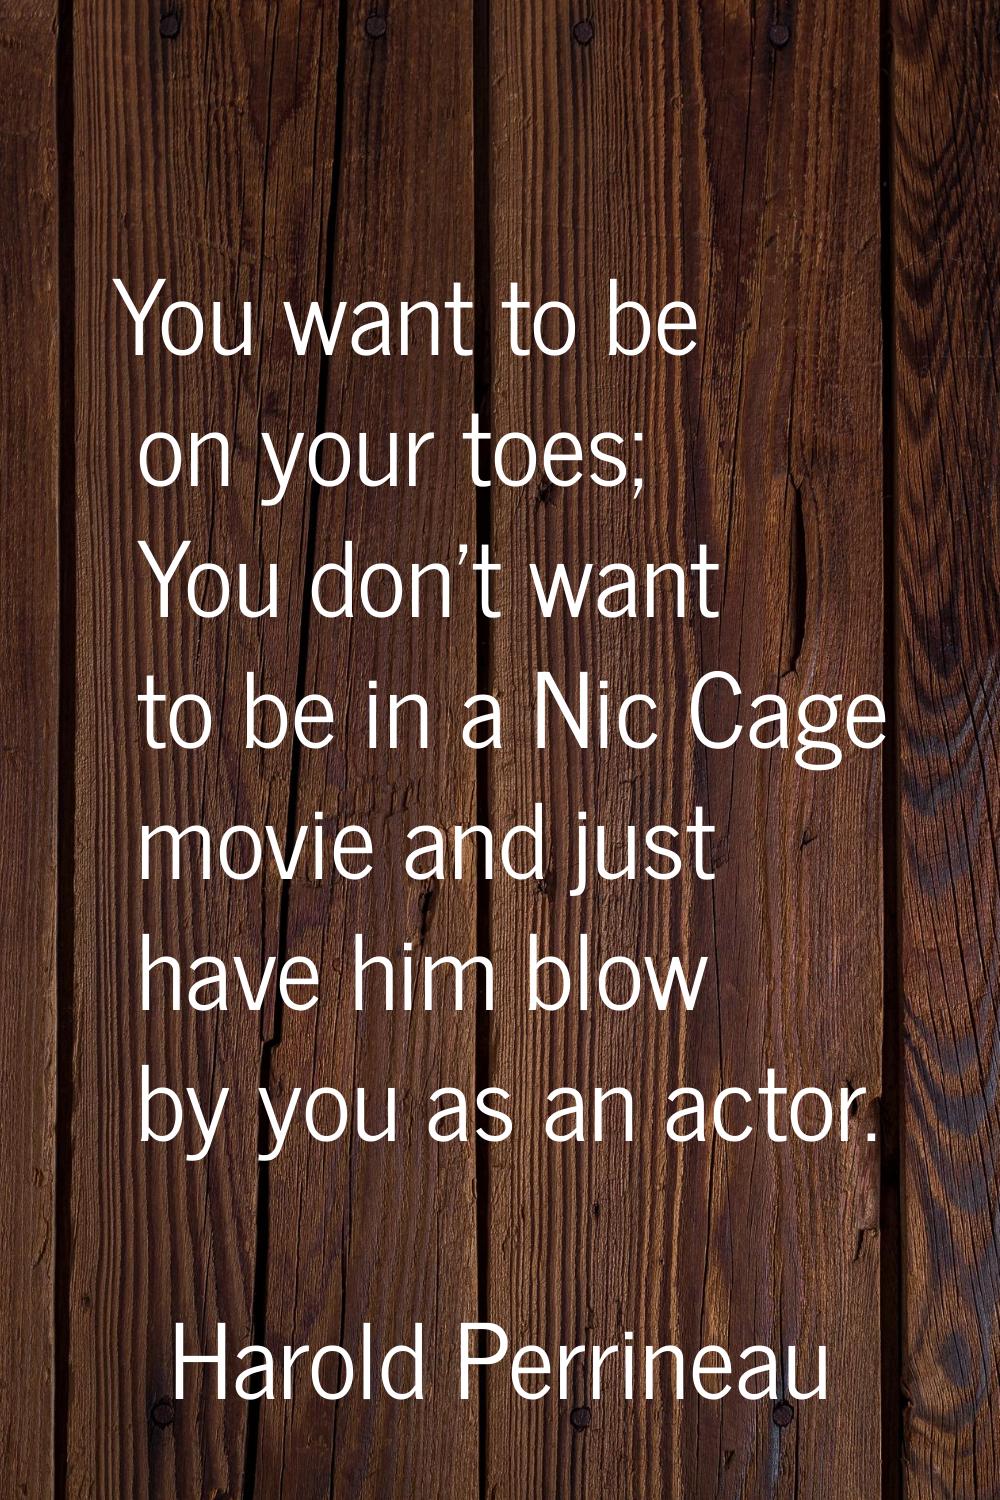 You want to be on your toes; You don't want to be in a Nic Cage movie and just have him blow by you